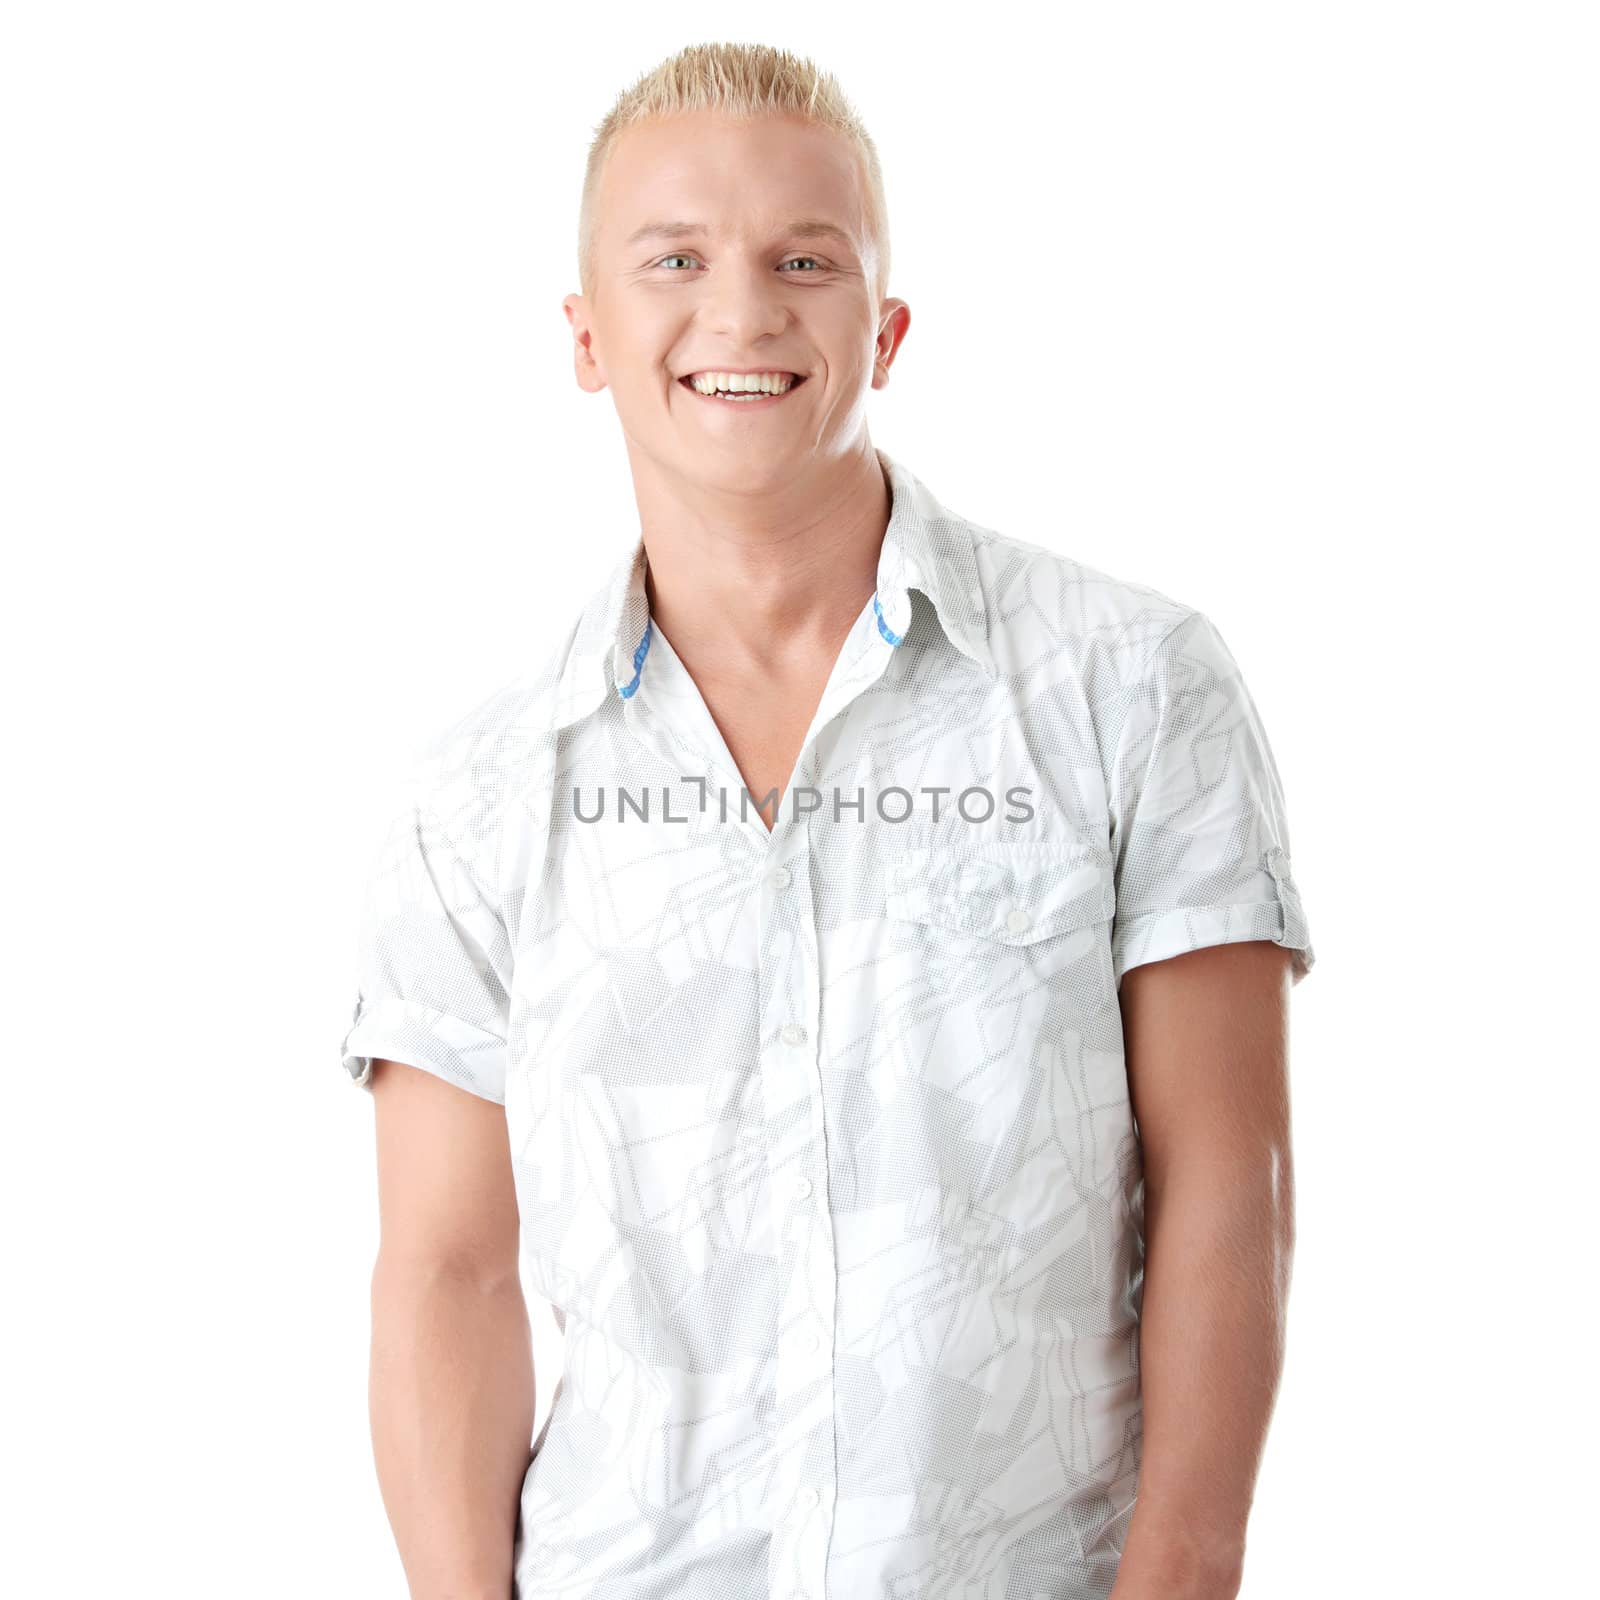 Casual man portrait smiling - isolated over a white background